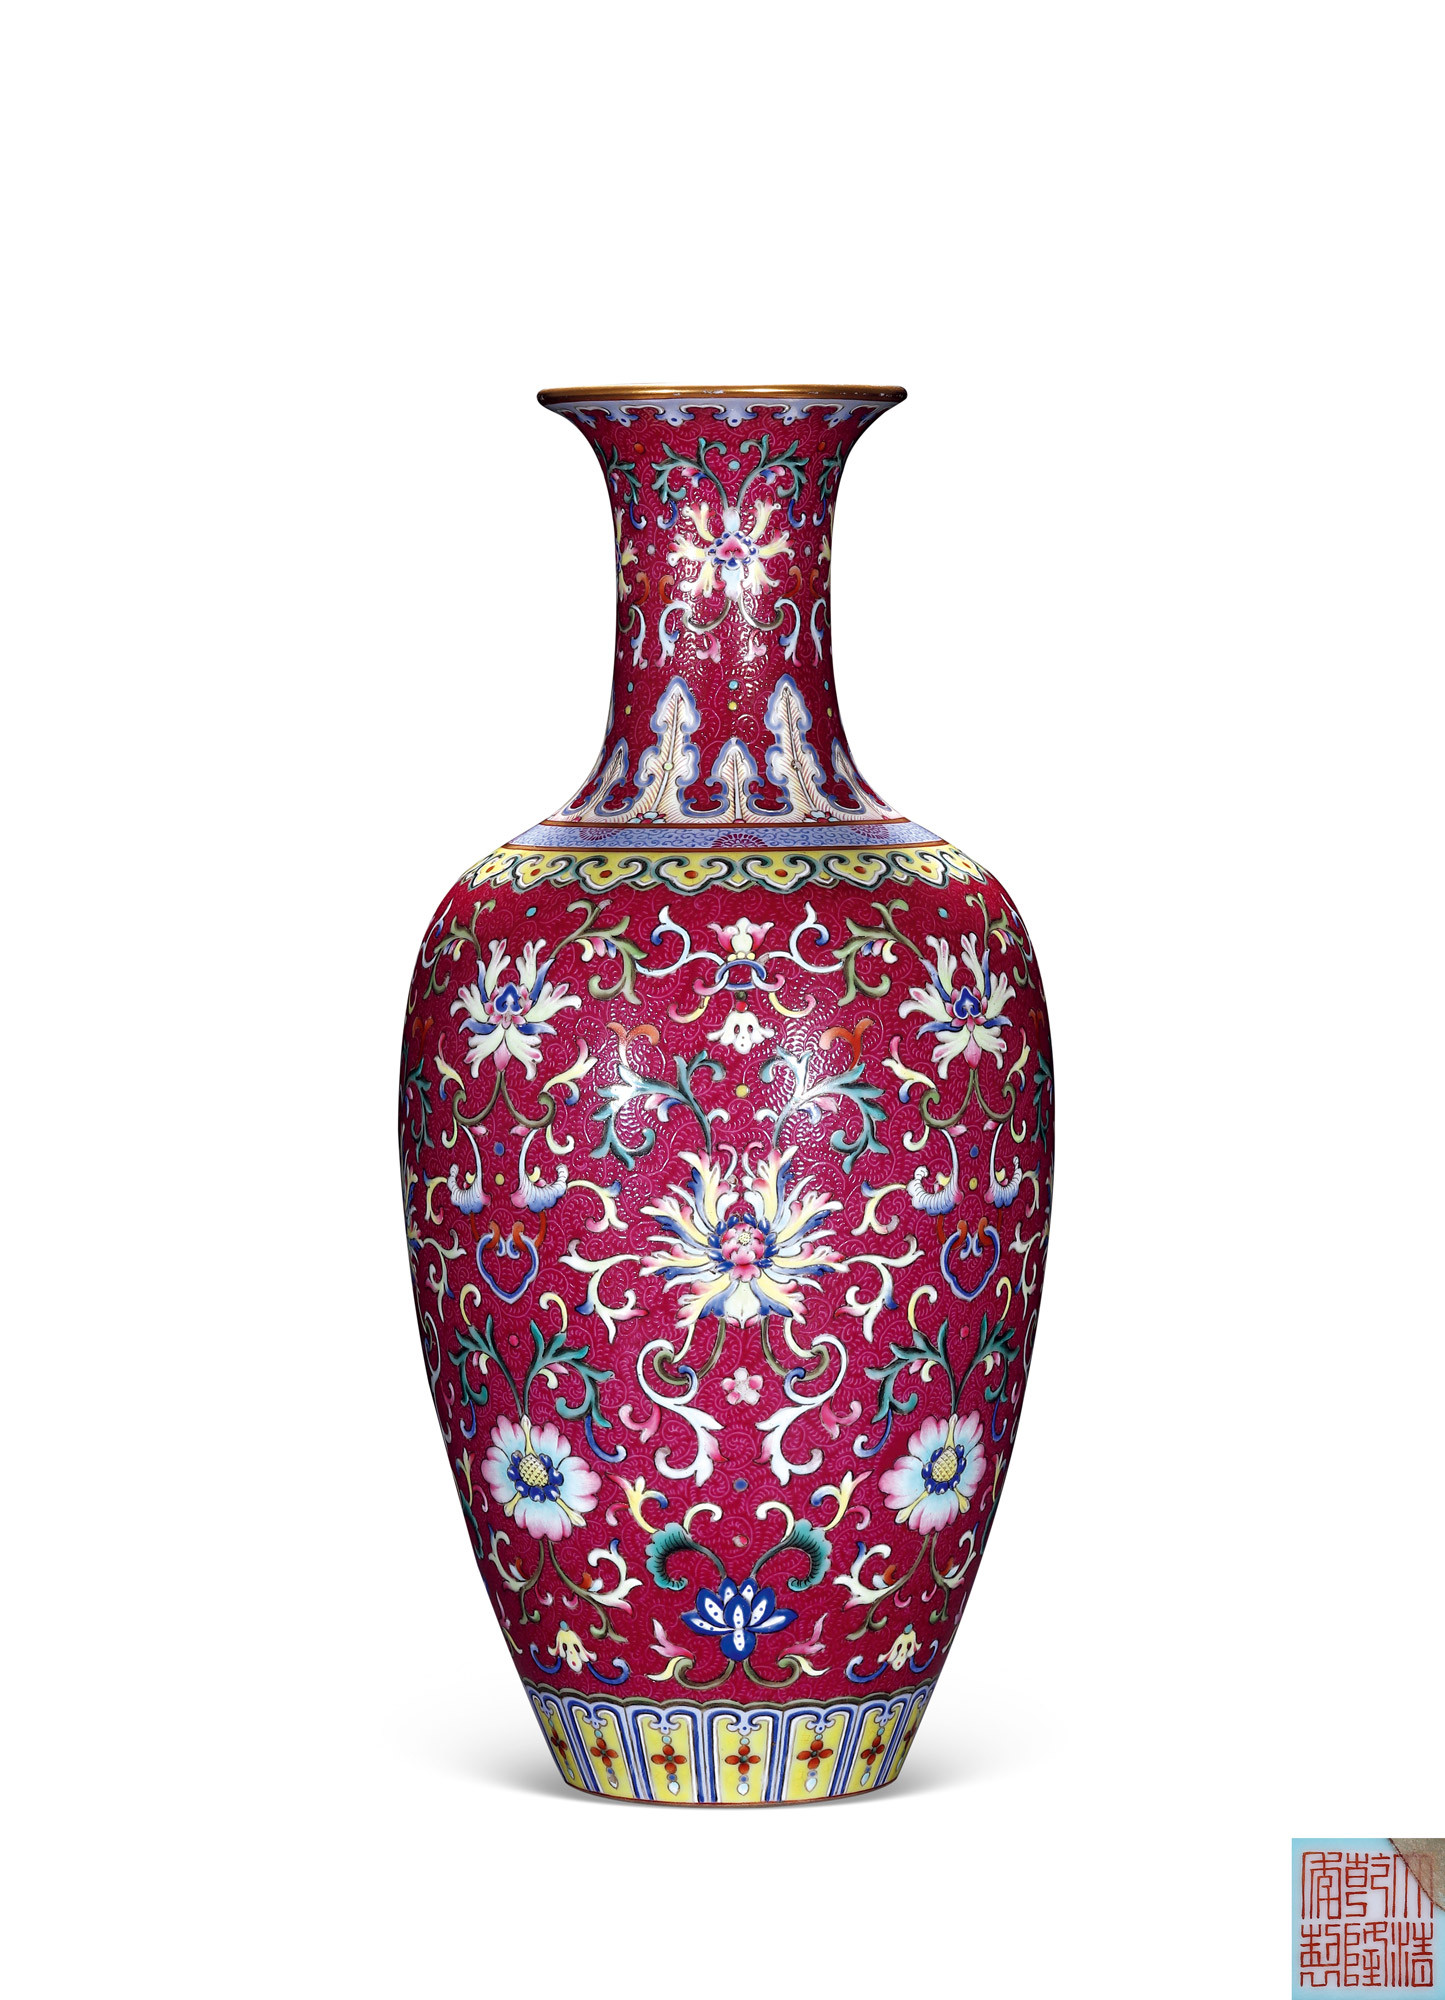 AN EXTREMELY RARE IMPERIAL YANGCAI RED-GROUND‘FLORAL’VASE, GUANYINPING